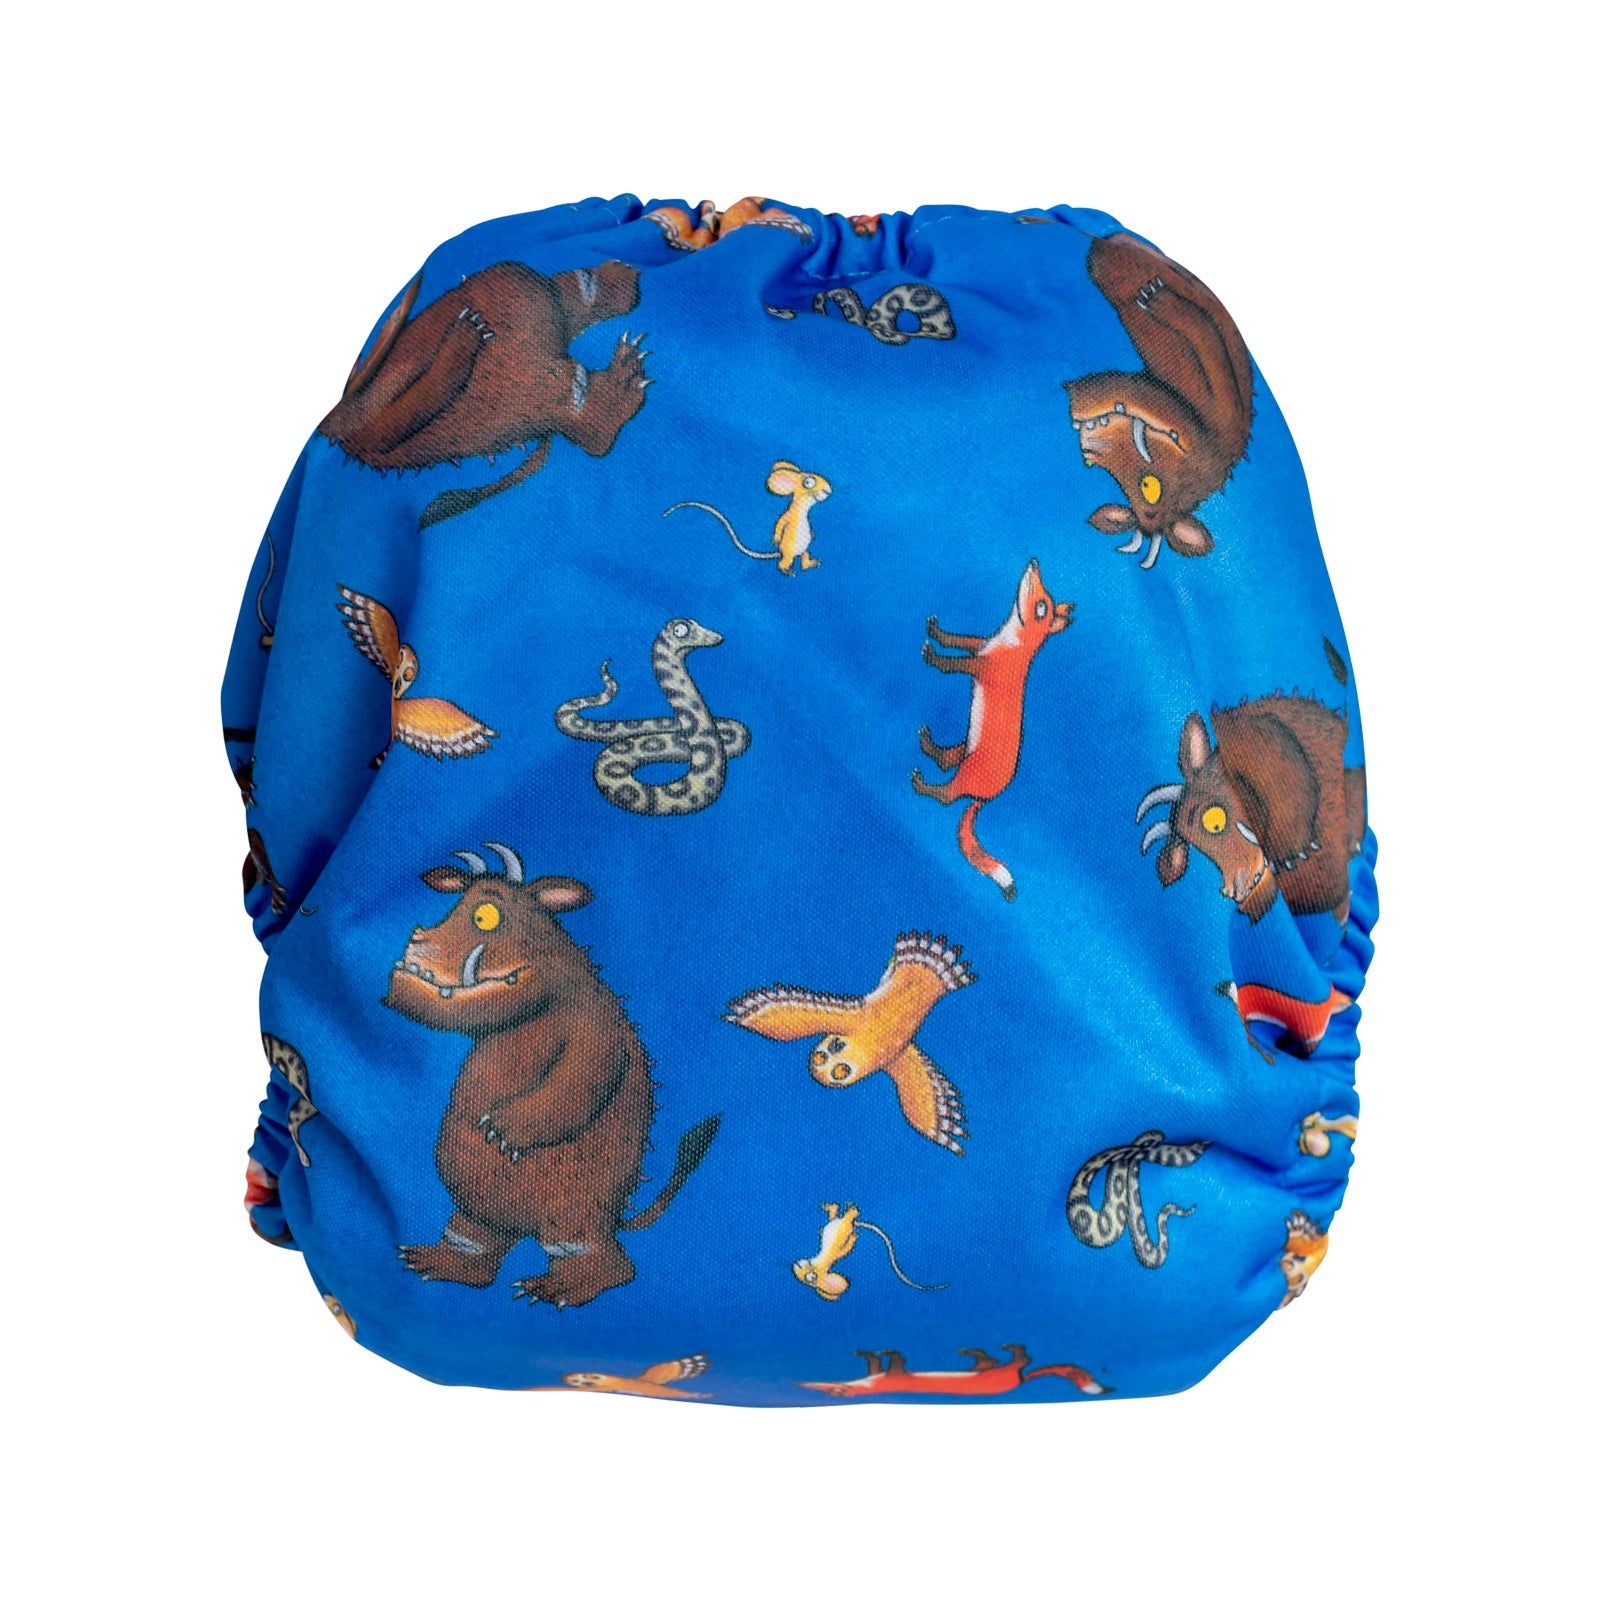 The Gruffalo And Friends Large Cloth Nappy